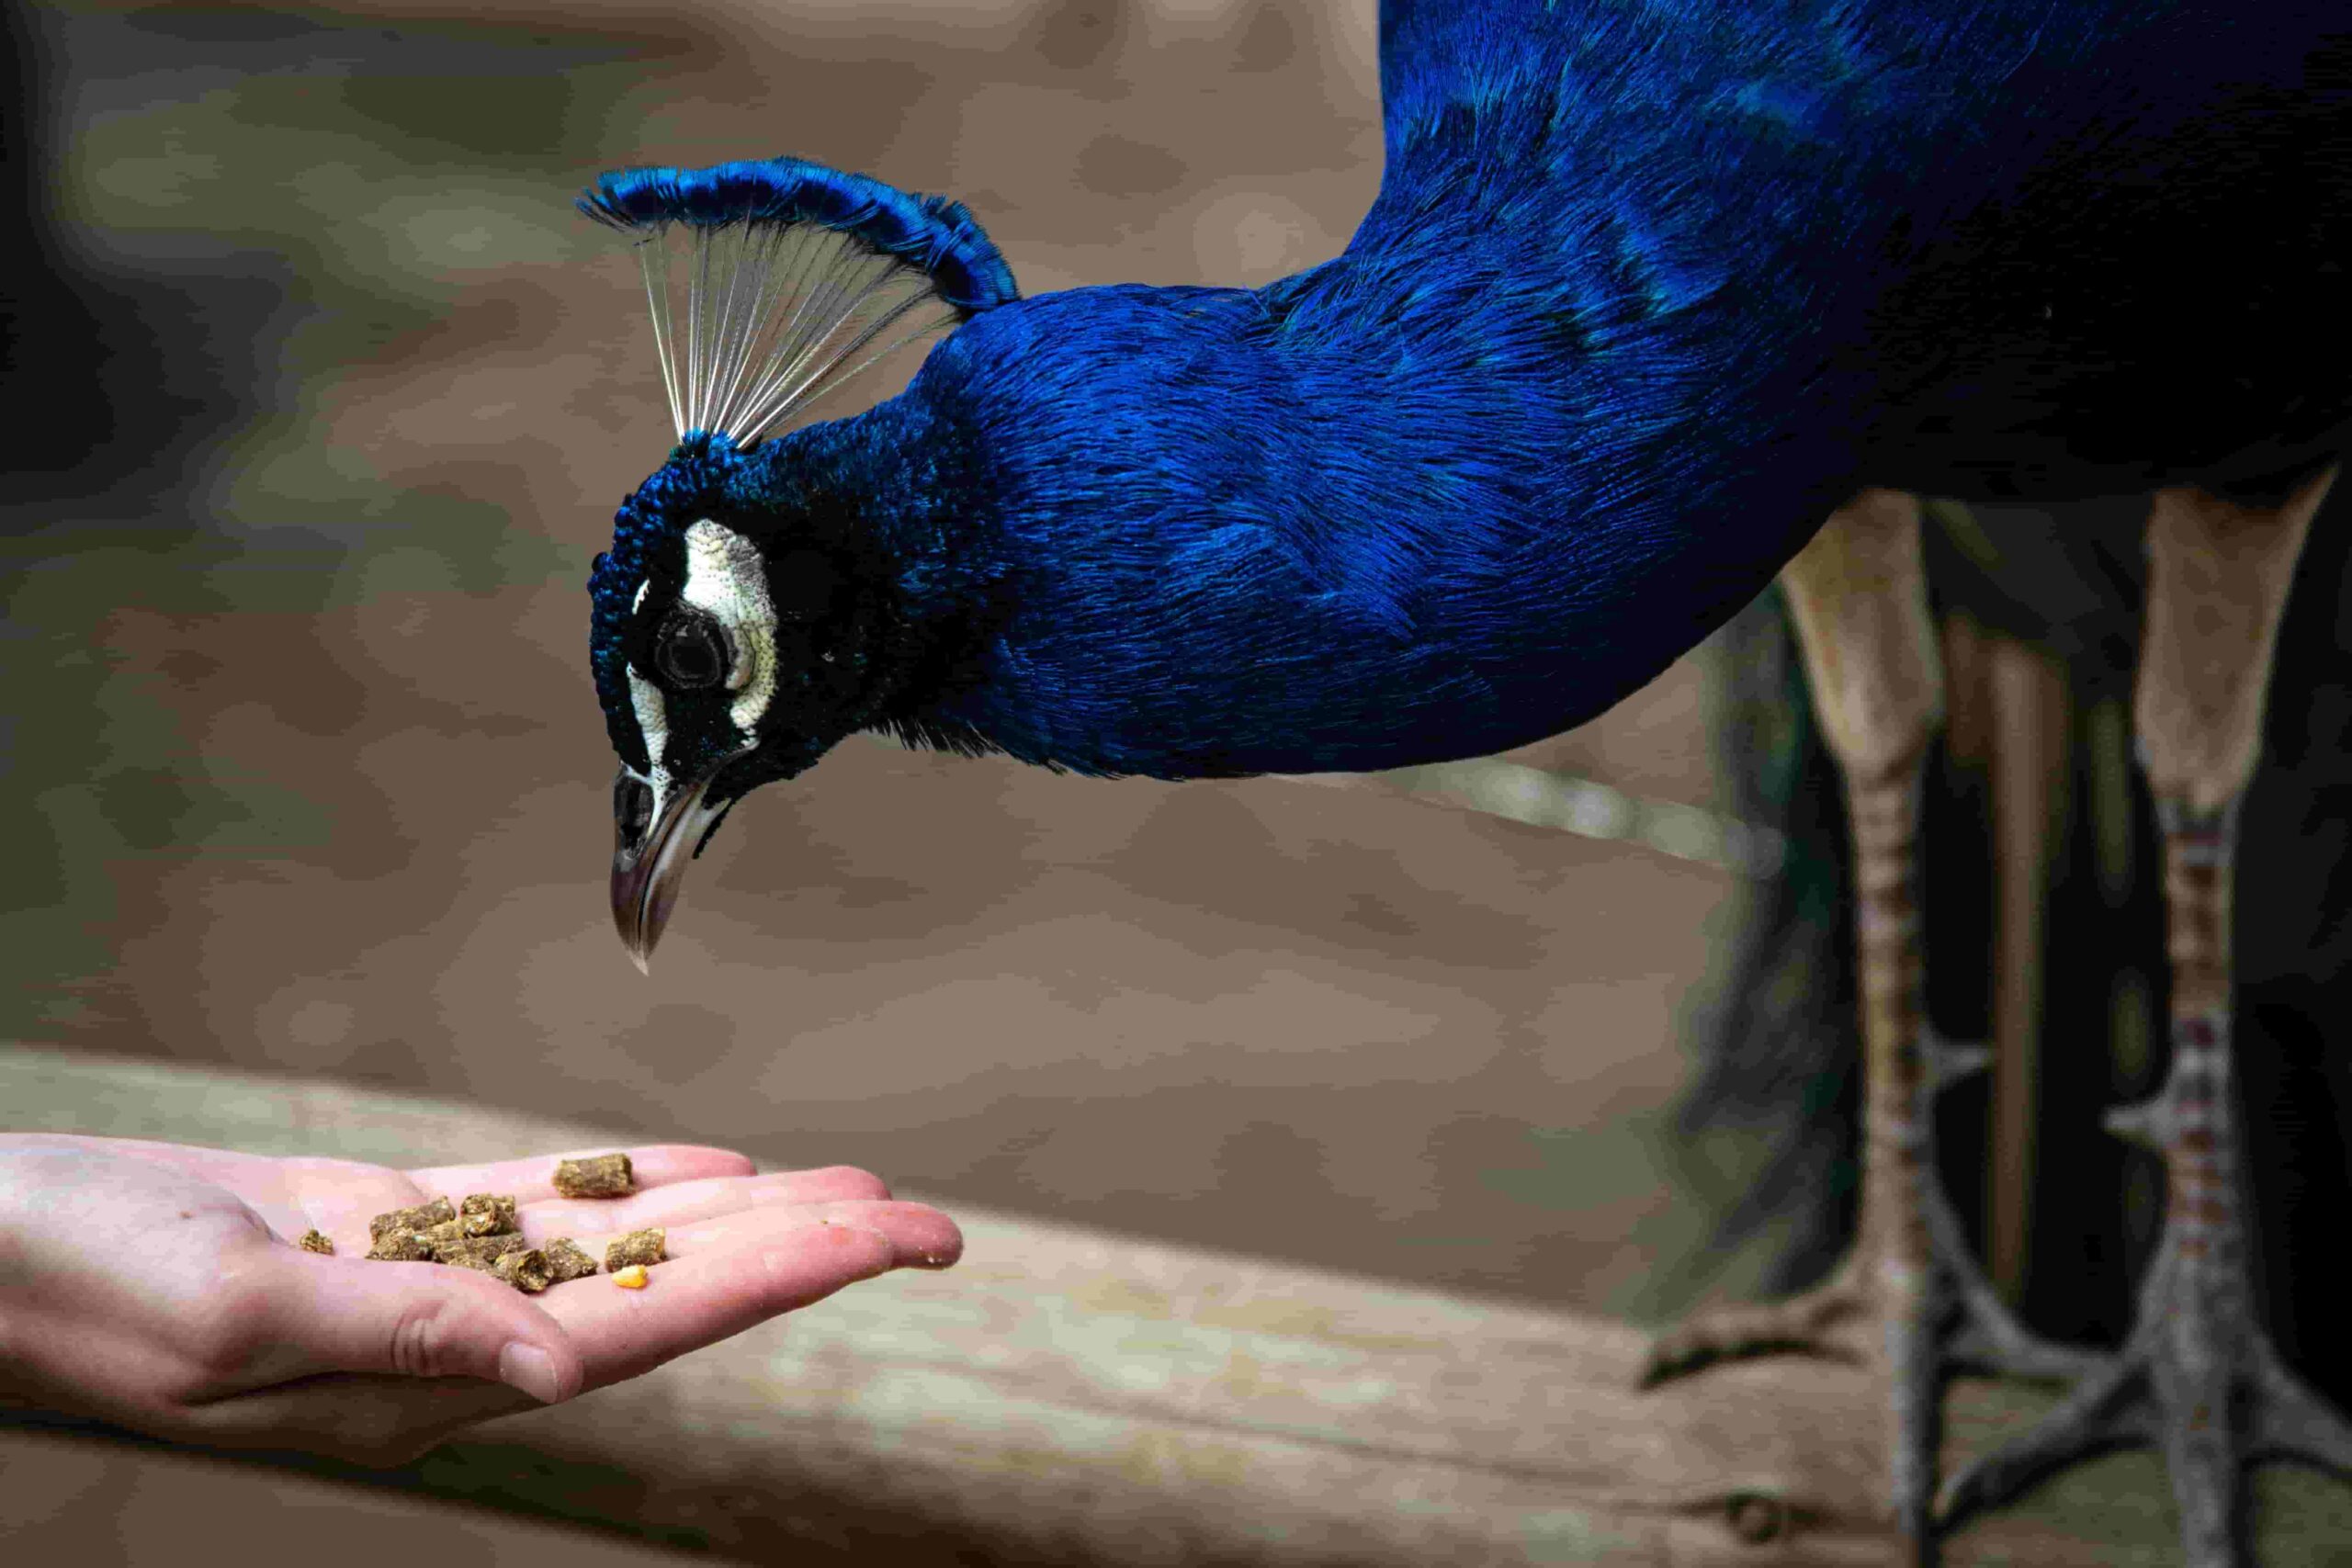 The Price of Peacocks How Much Will It Cost to Add One to Your Flock